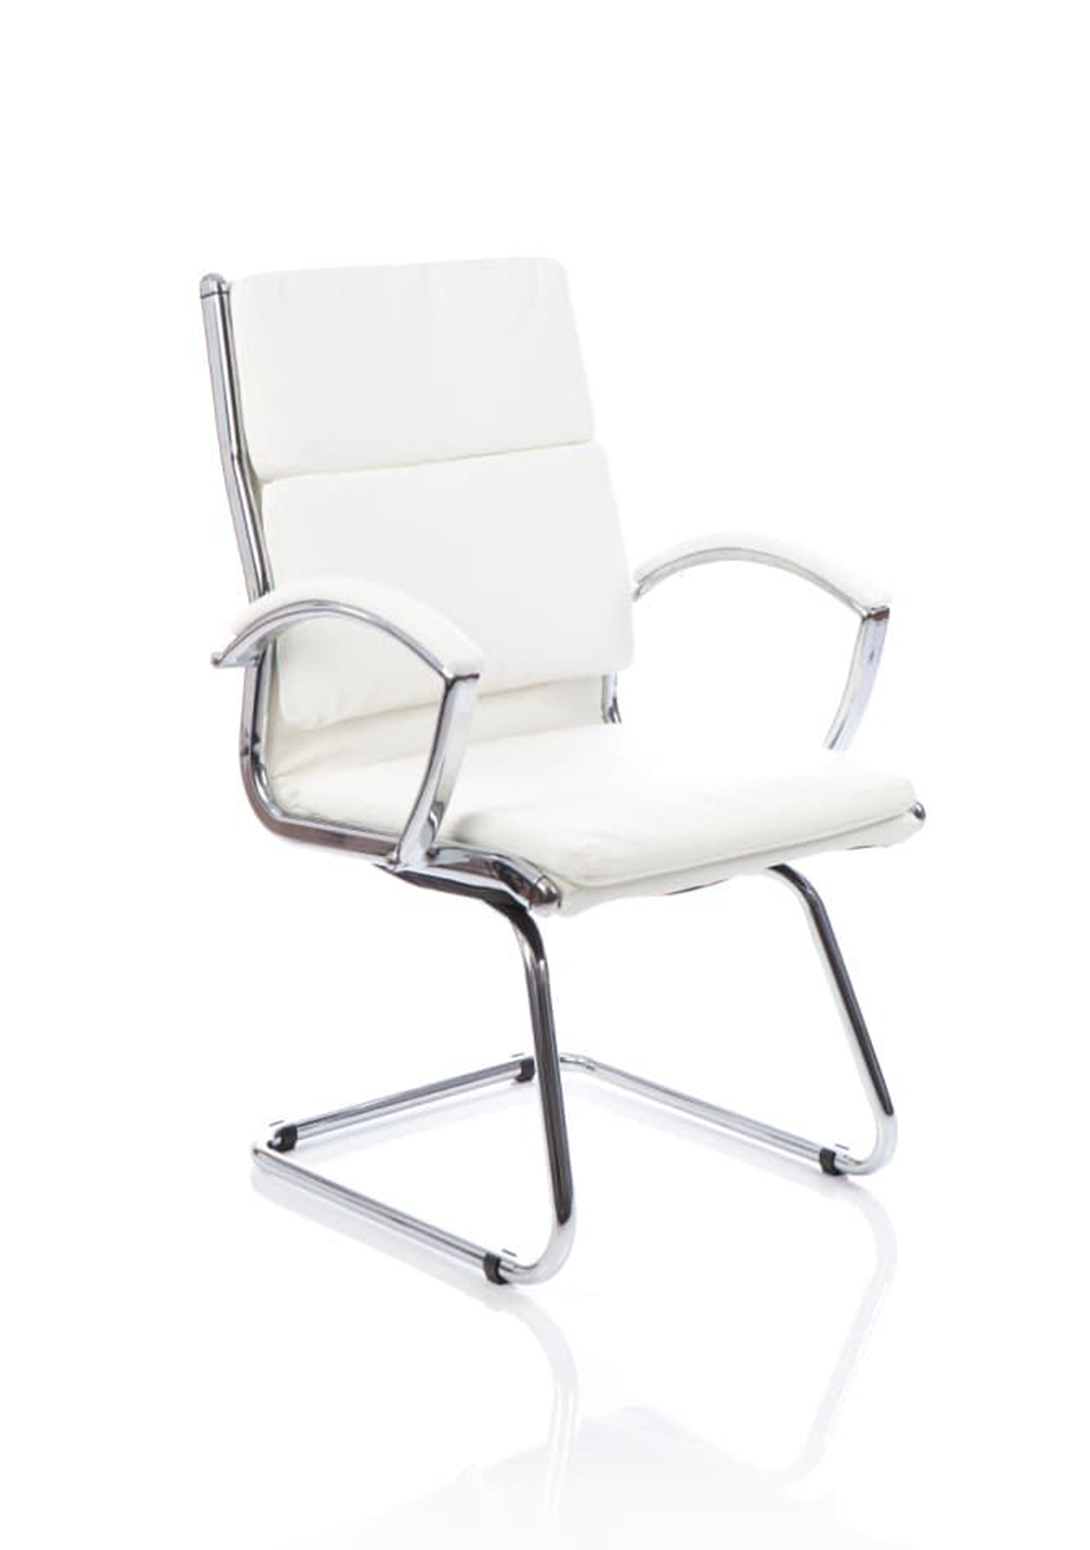 Classic Cantilever Chair